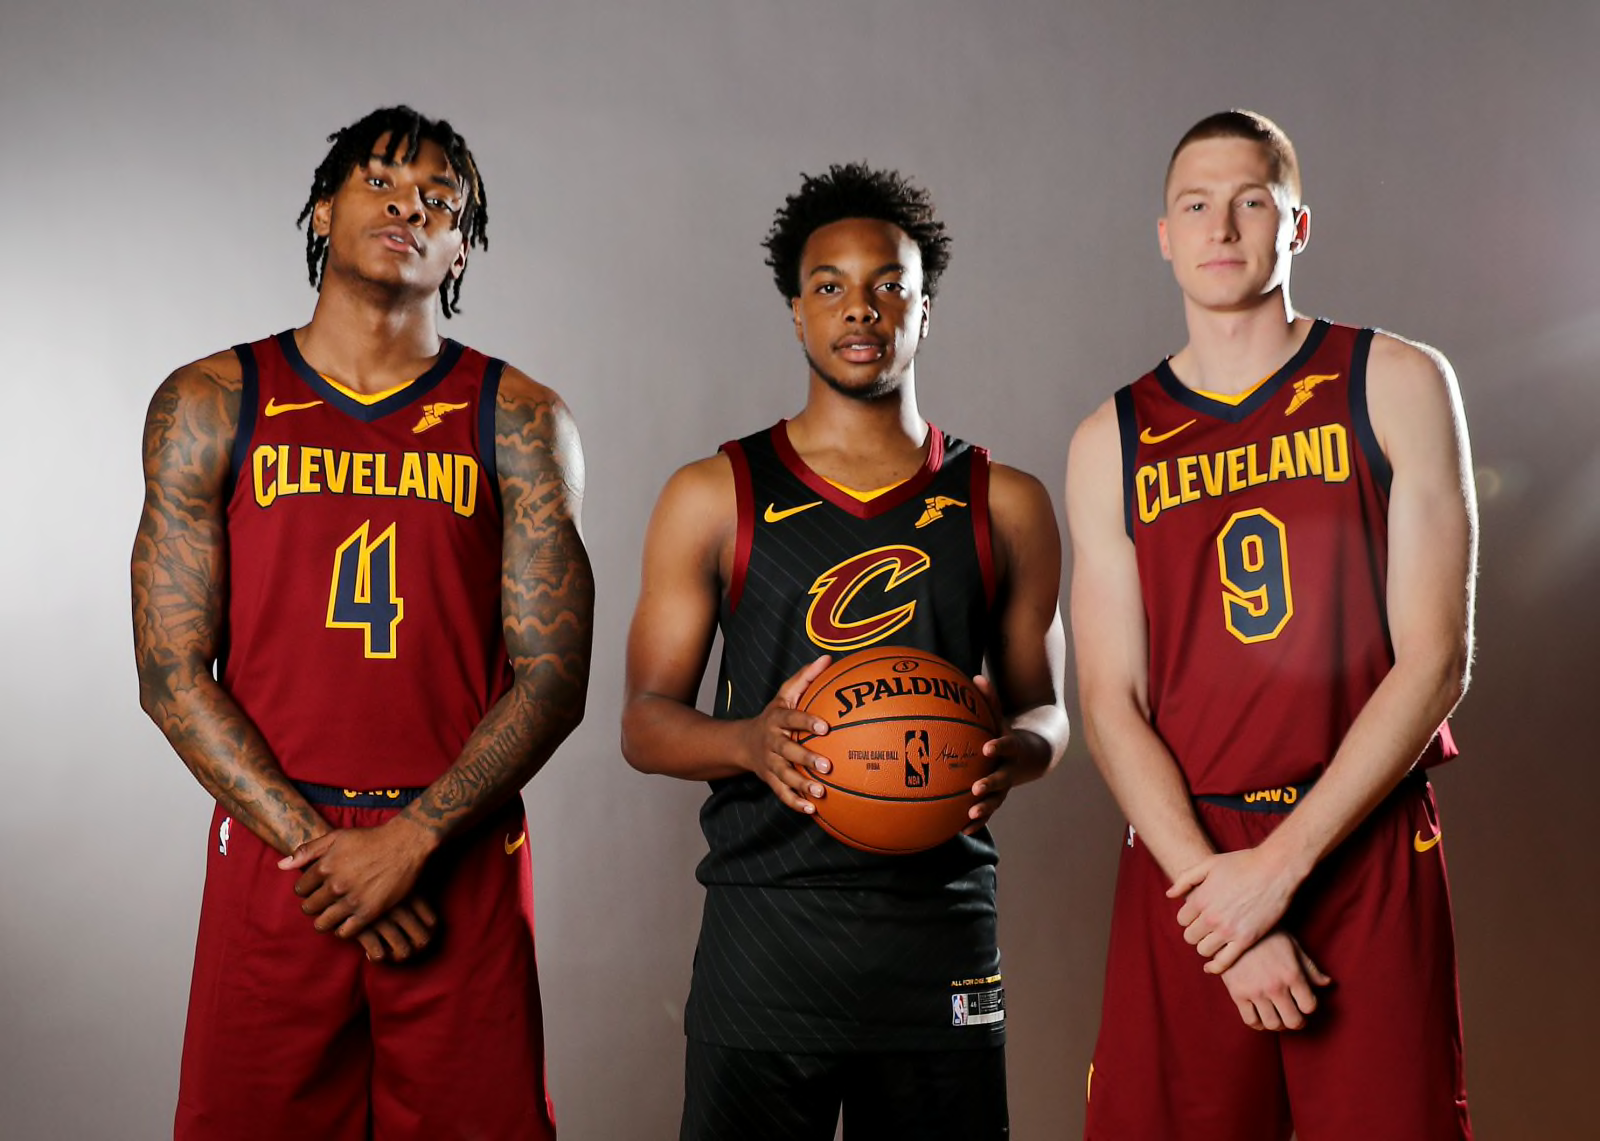 Cleveland Cavaliers: 2021, 2022 drafts could turn CLE into one of